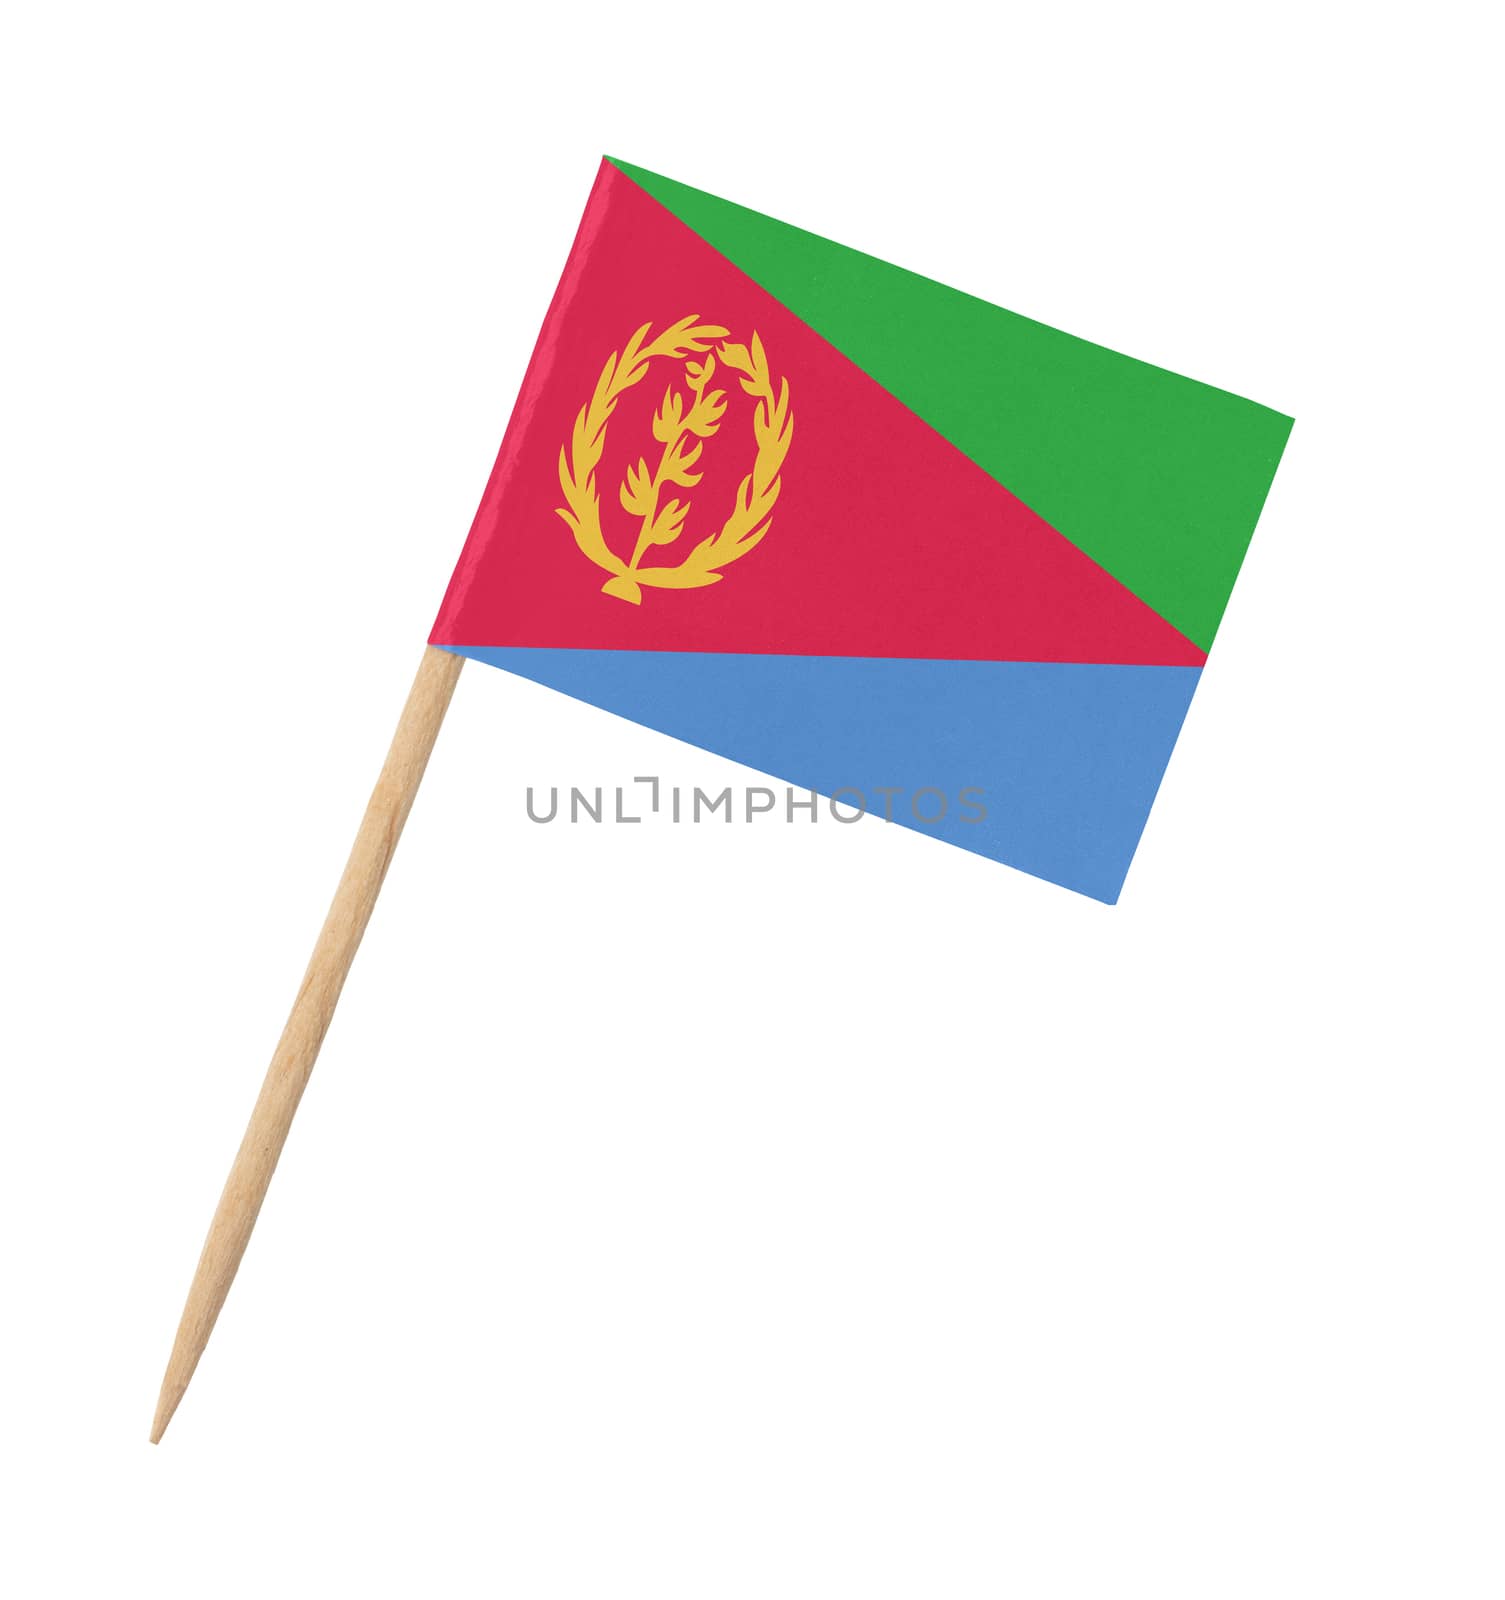 Small paper flag of Eritrea on wooden stick, isolated on white